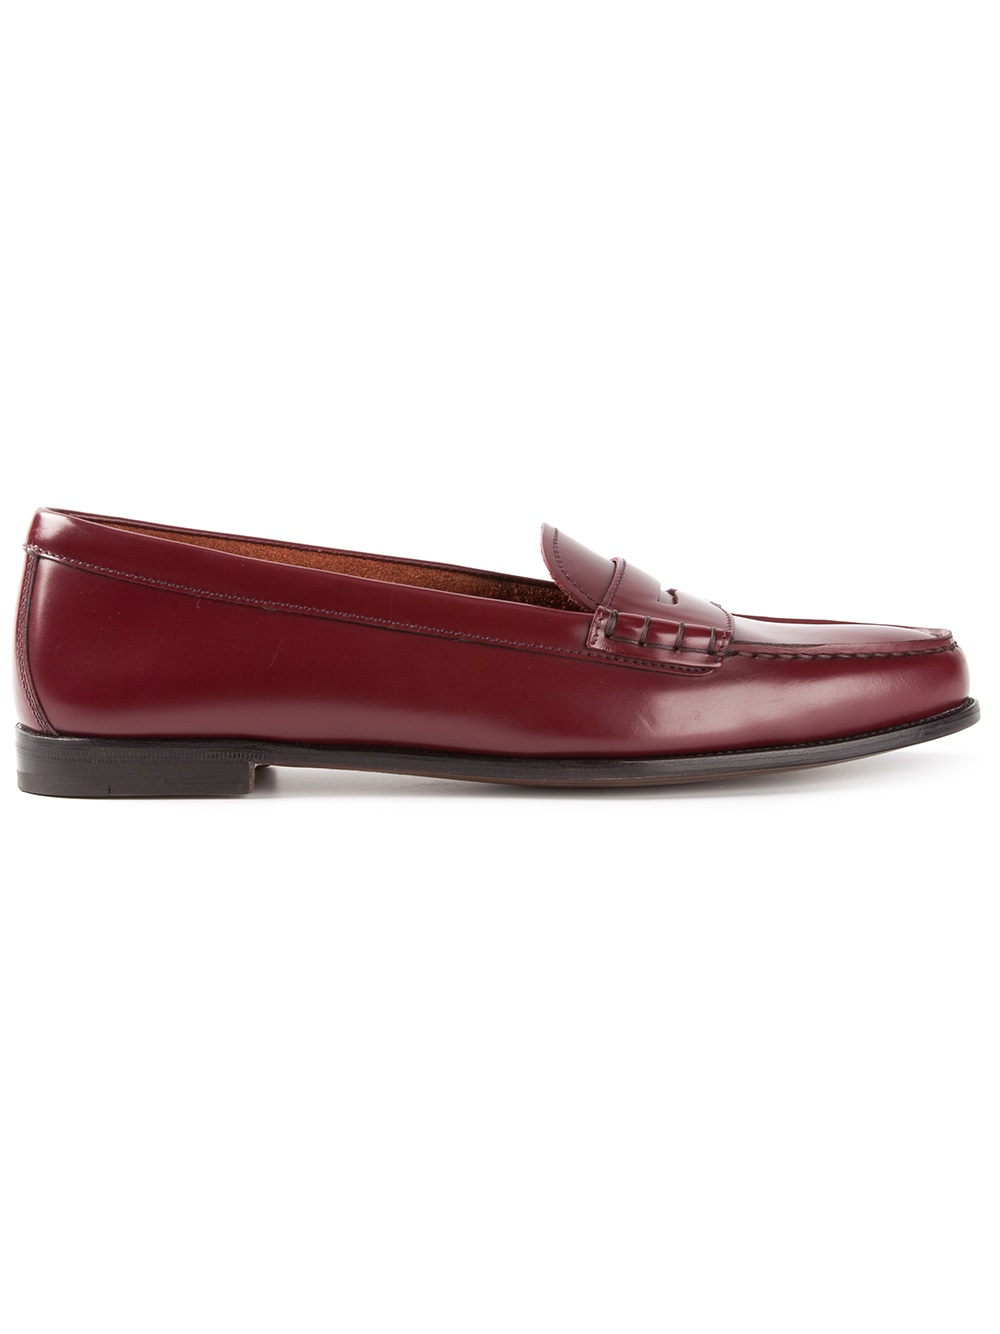 Church's Classic Penny Loafer in Red - Lyst